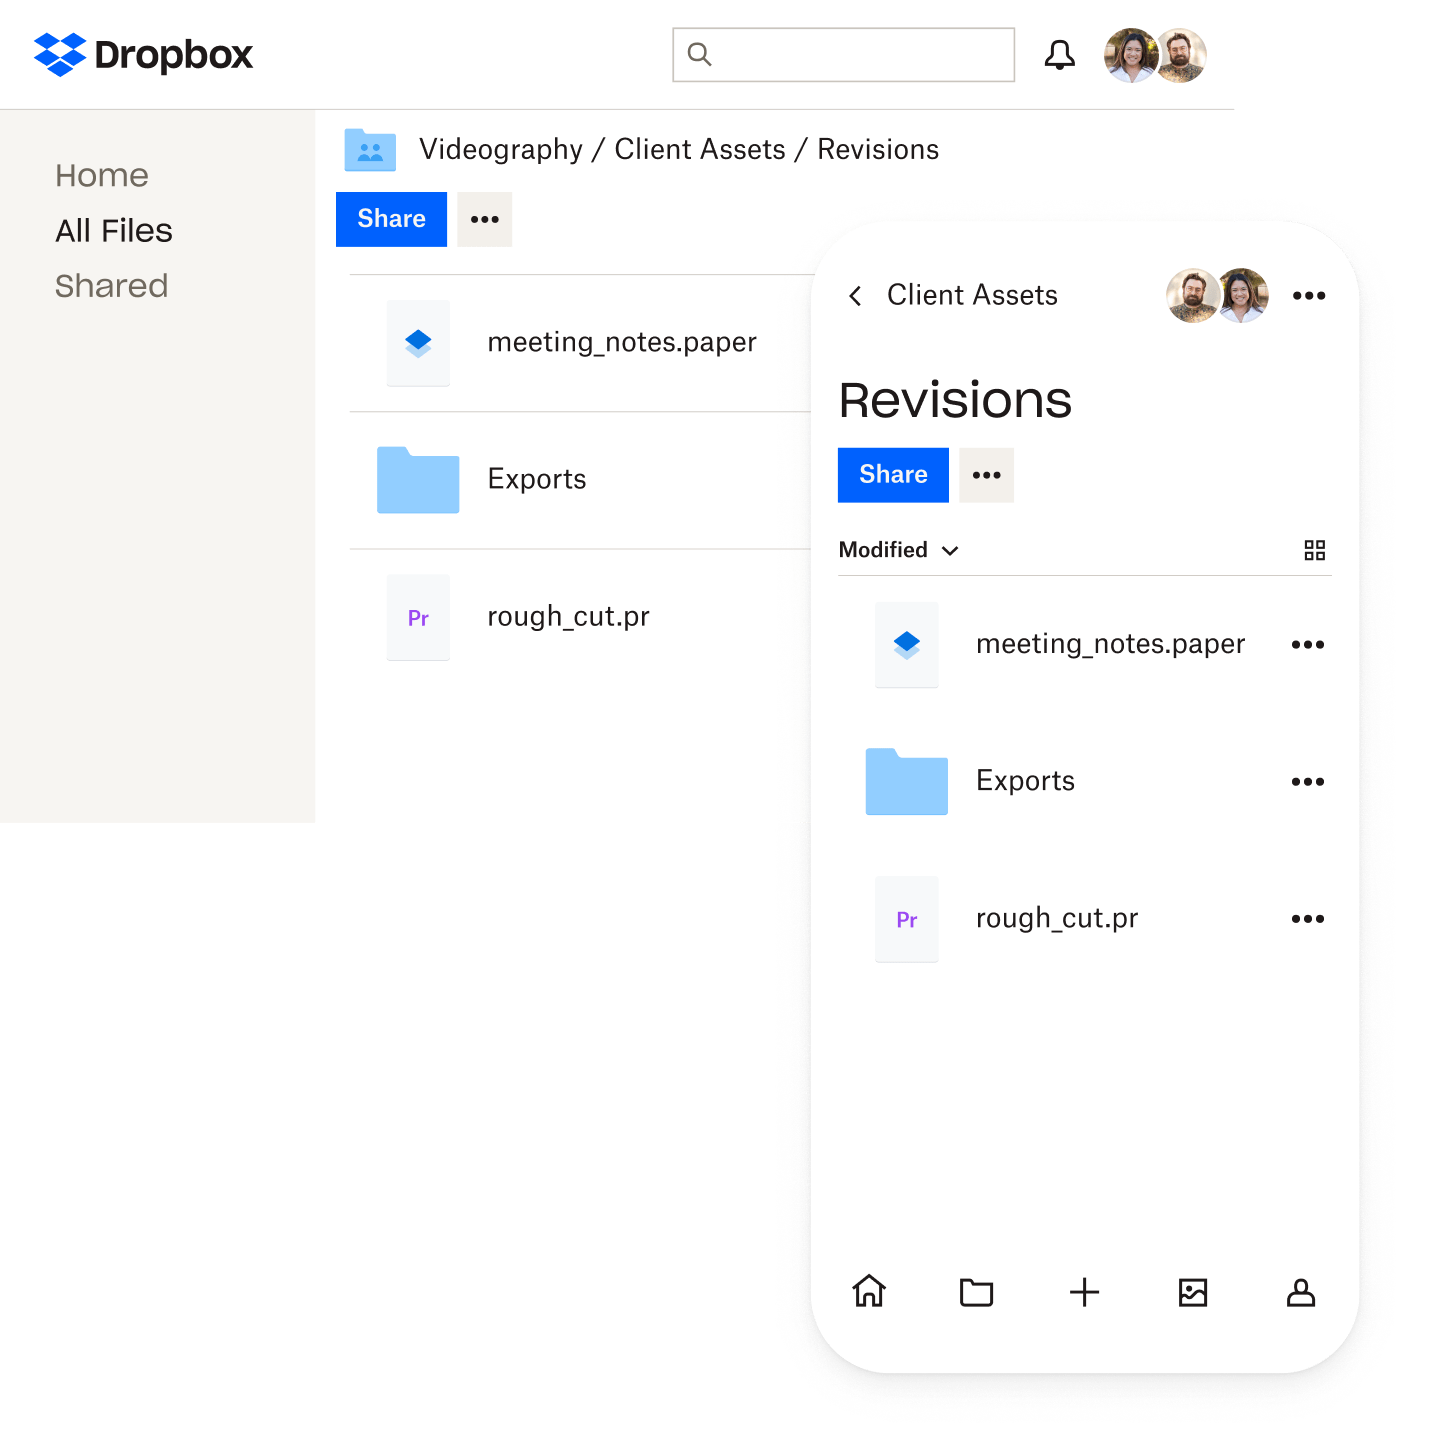 The Dropbox file interface as viewed on a desktop and a mobile device